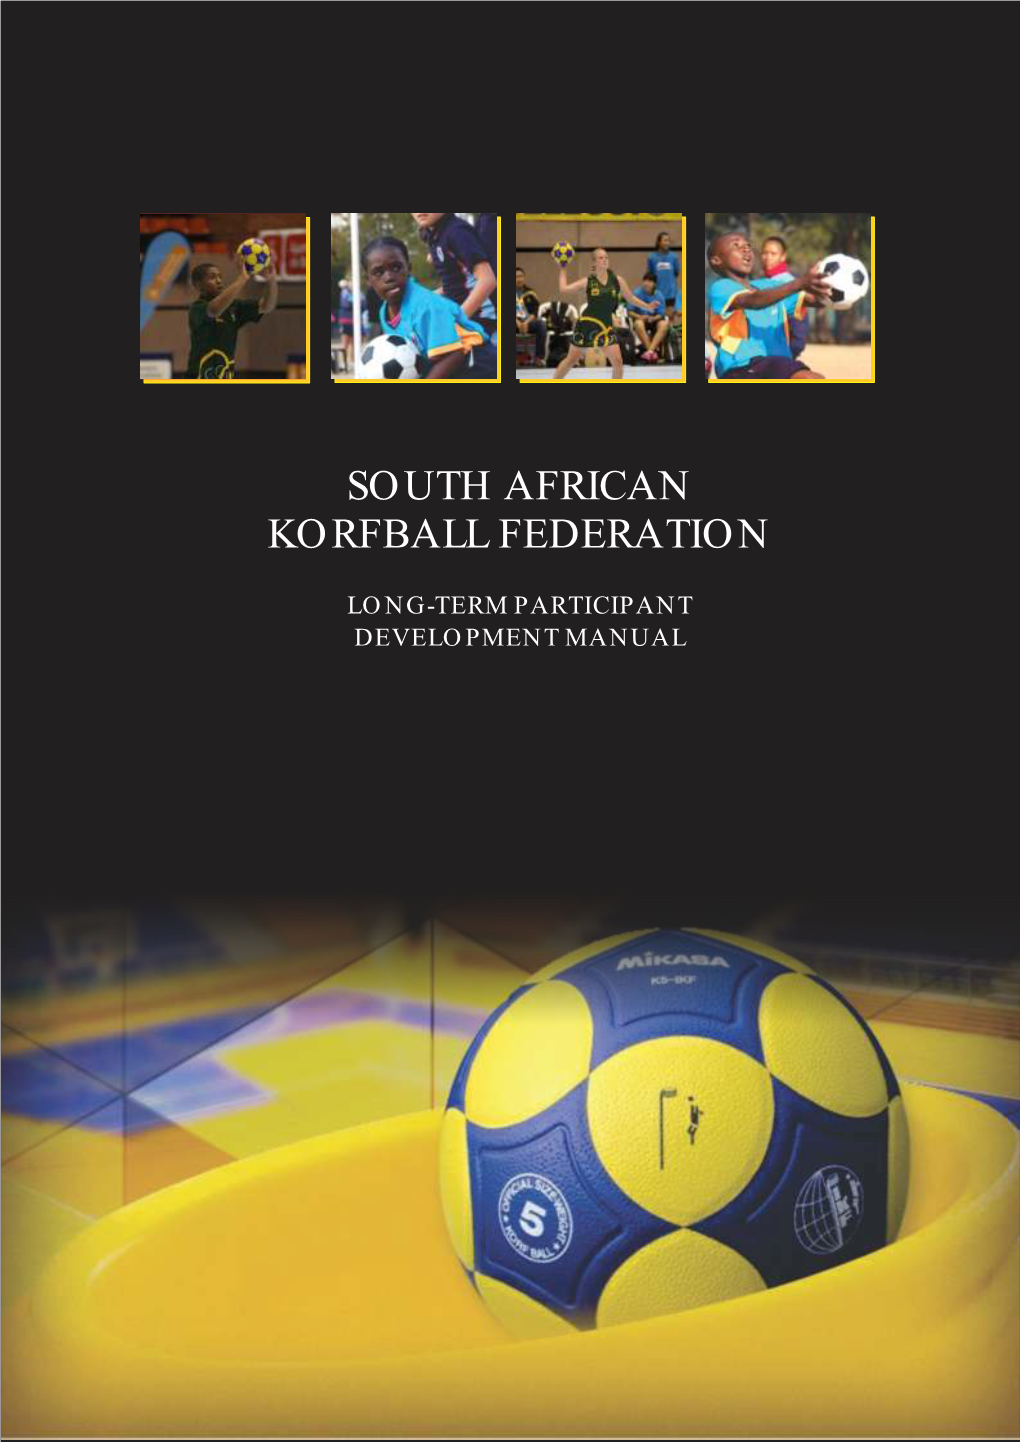 South African Korfball Federation